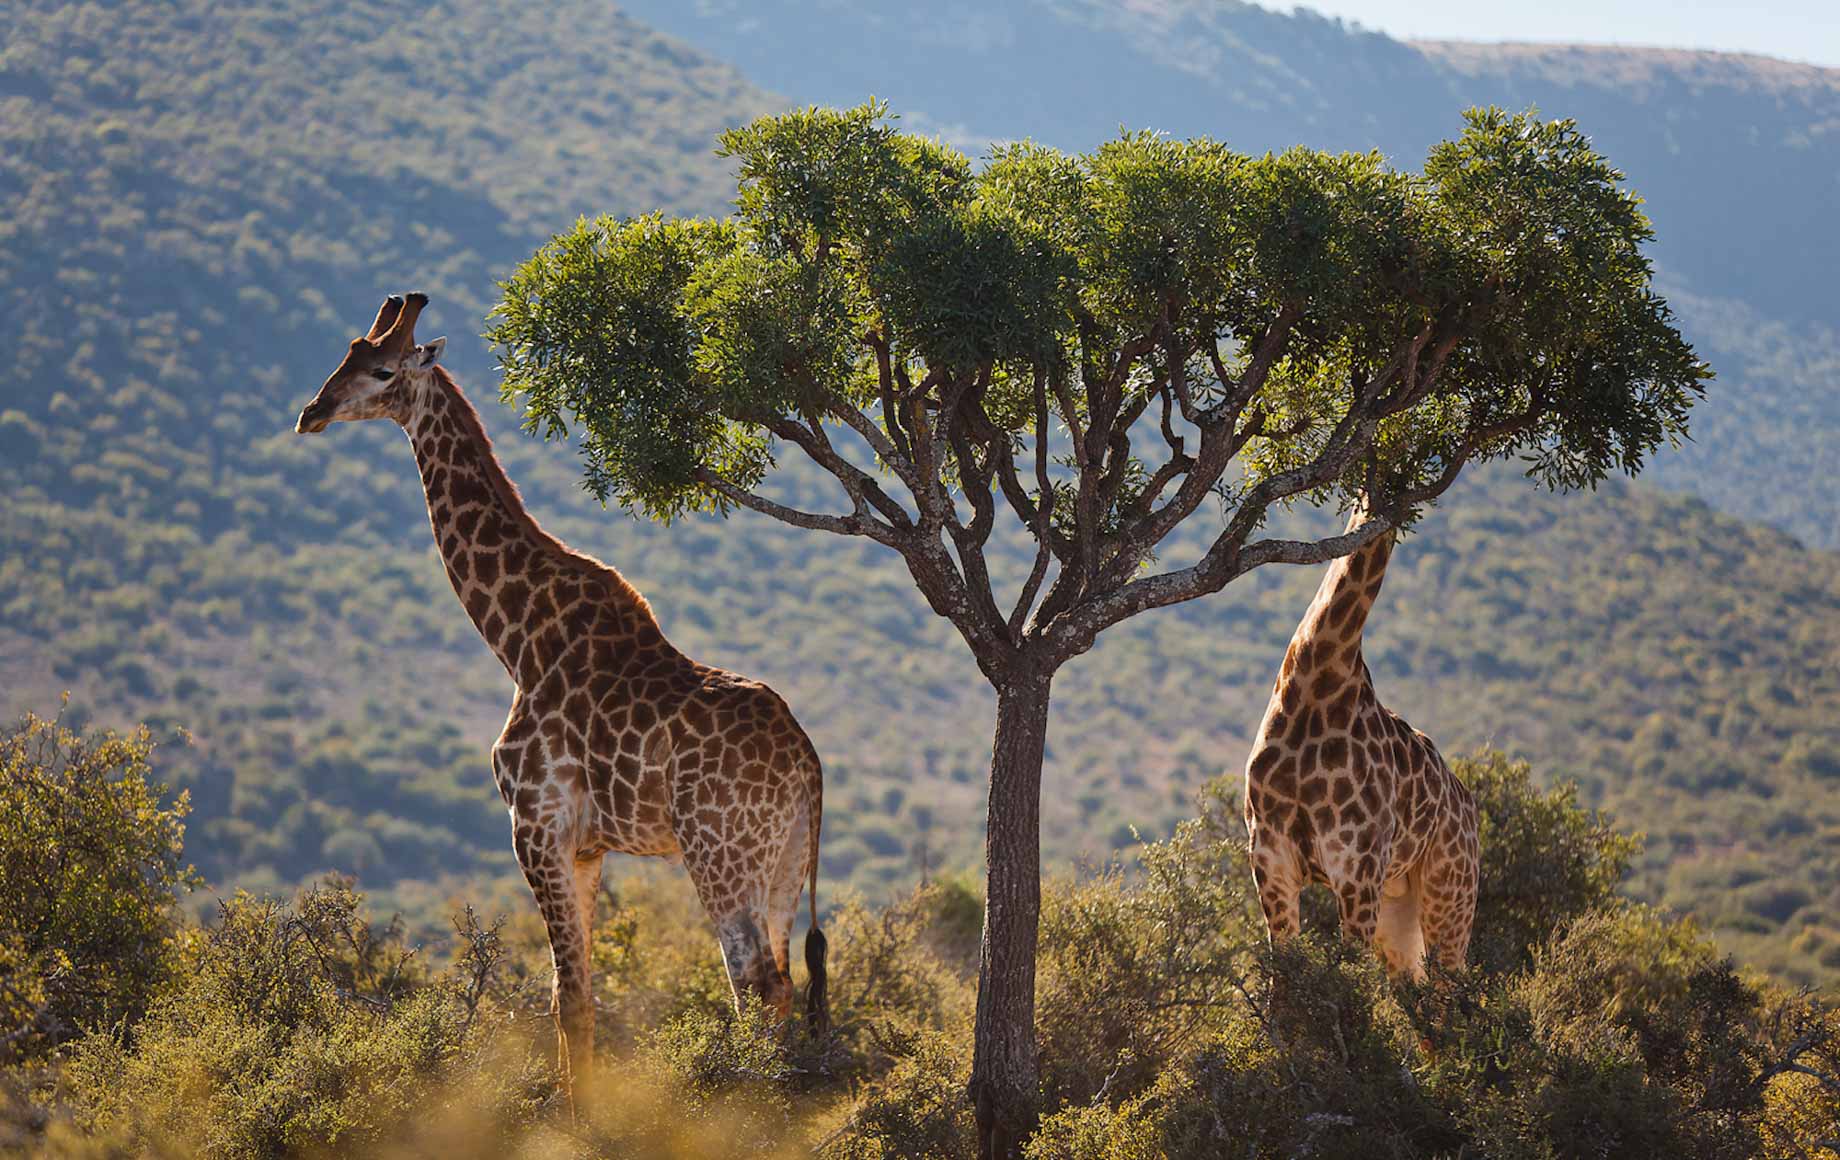 Giraffes at The Eastern Cape